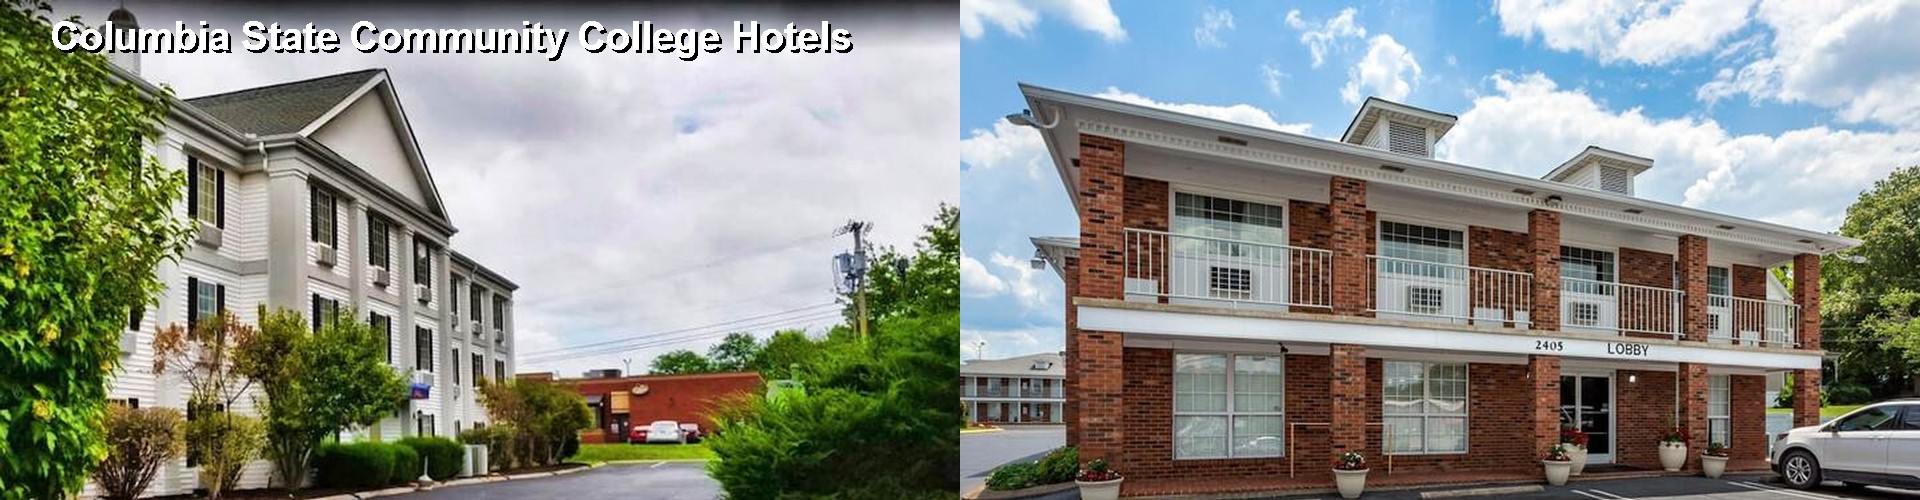 4 Best Hotels near Columbia State Community College